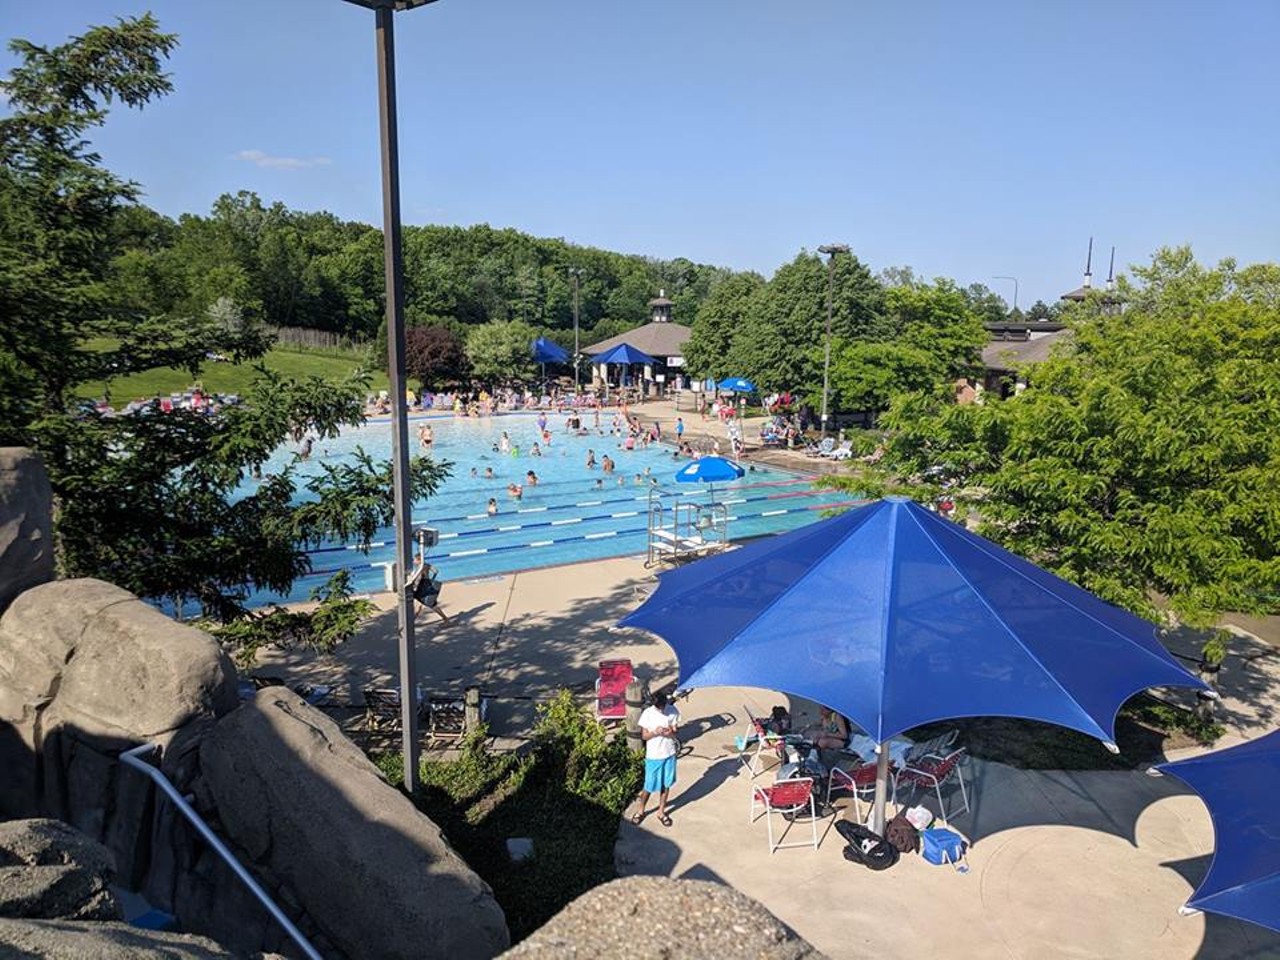 Troy Family Aquatic Center
3425 Civic Center Dr., Troy
The Troy Family Aquatic Center is a literal playground for fun, considering the sand volleyball and play area, in addition to the main pool and kiddie area with a waterfall and a splash pad. The center&#146;s indoor pool is open year round
Photo via  Troy Family Aquatic Center / Facebook 